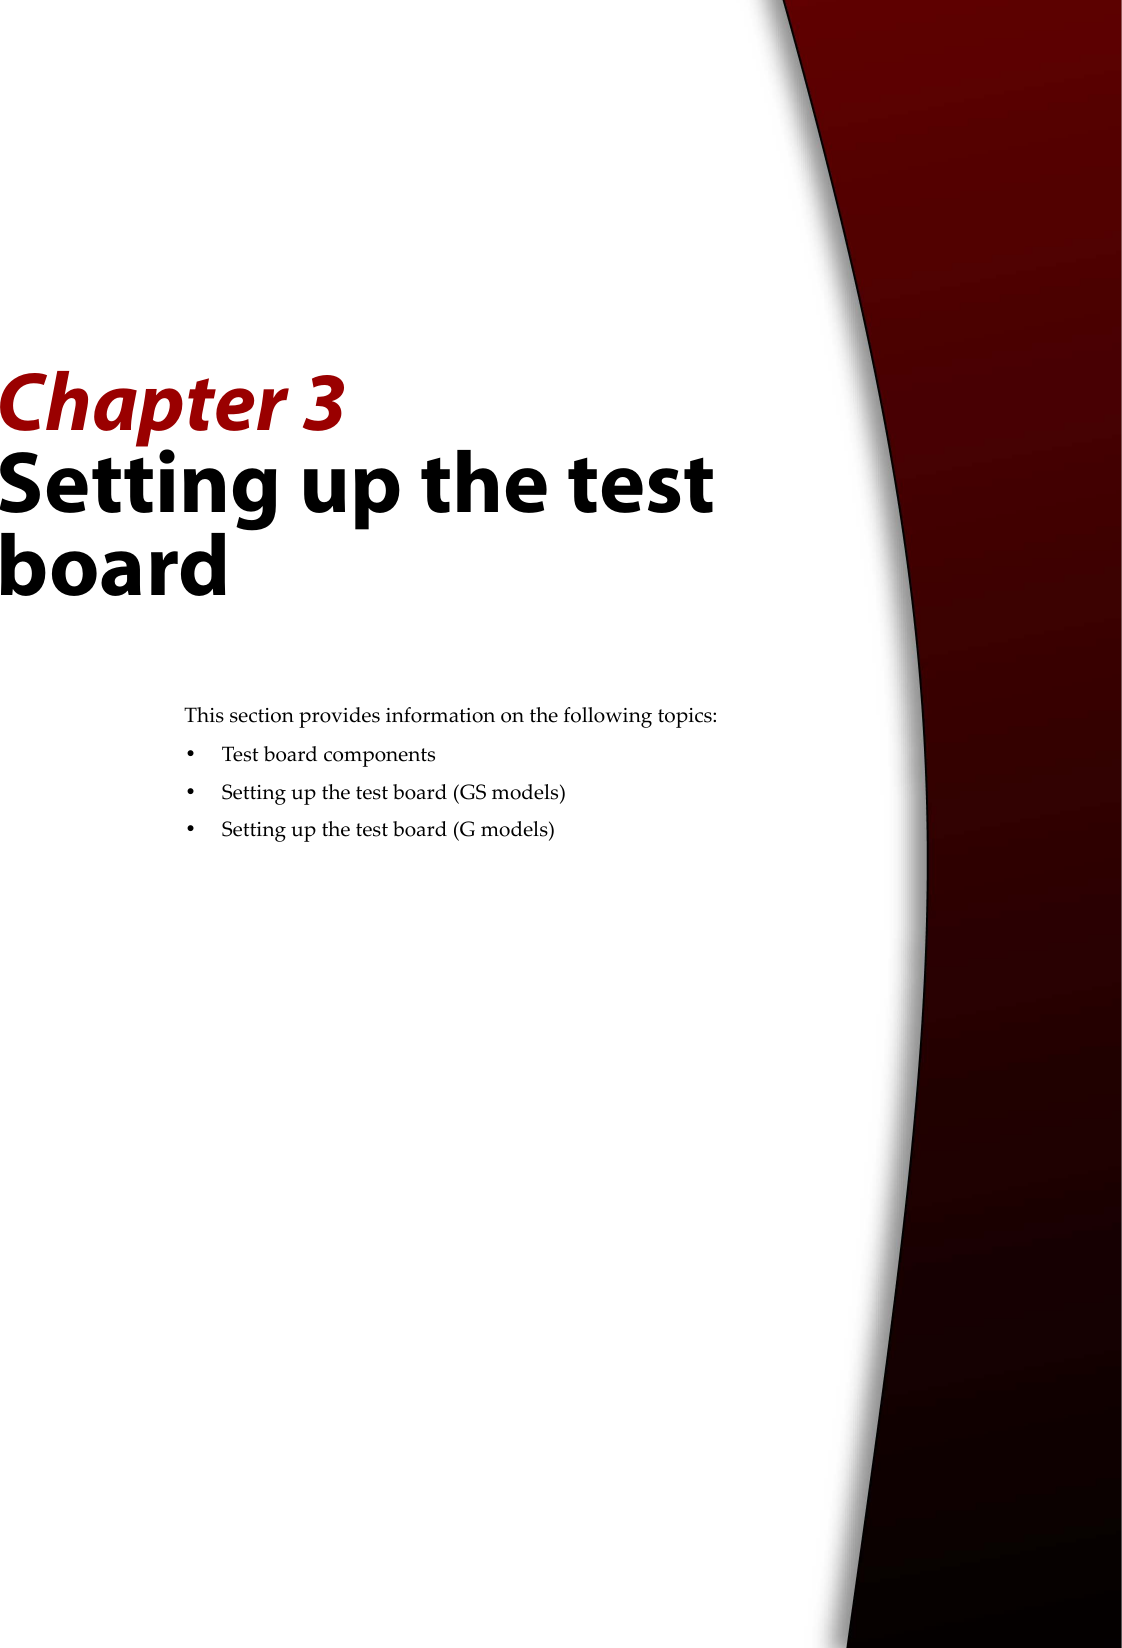 Chapter 3Setting up the test boardThis section provides information on the following topics:•Test board components•Setting up the test board (GS models)•Setting up the test board (G models)